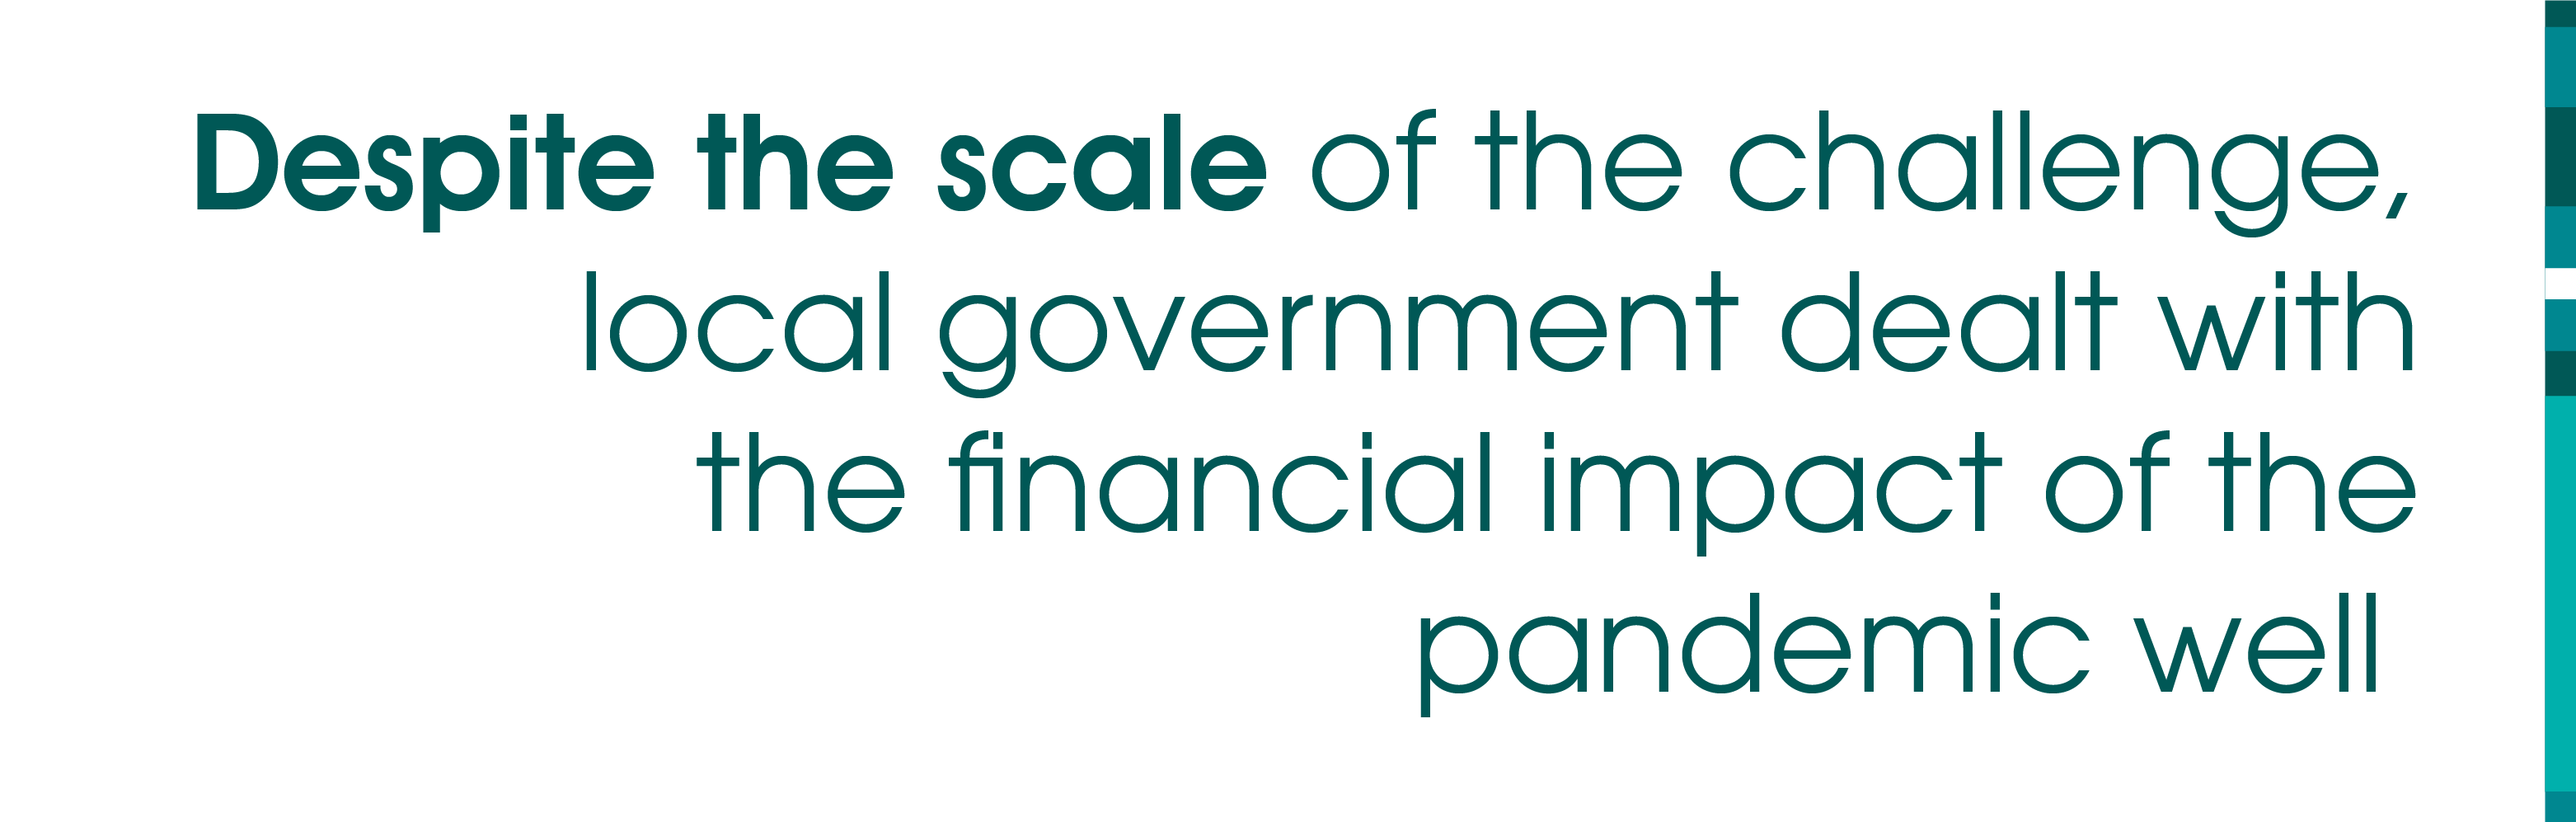 Despite the scale of the challenge, local government dealt with the financial impact of the pandemic well.